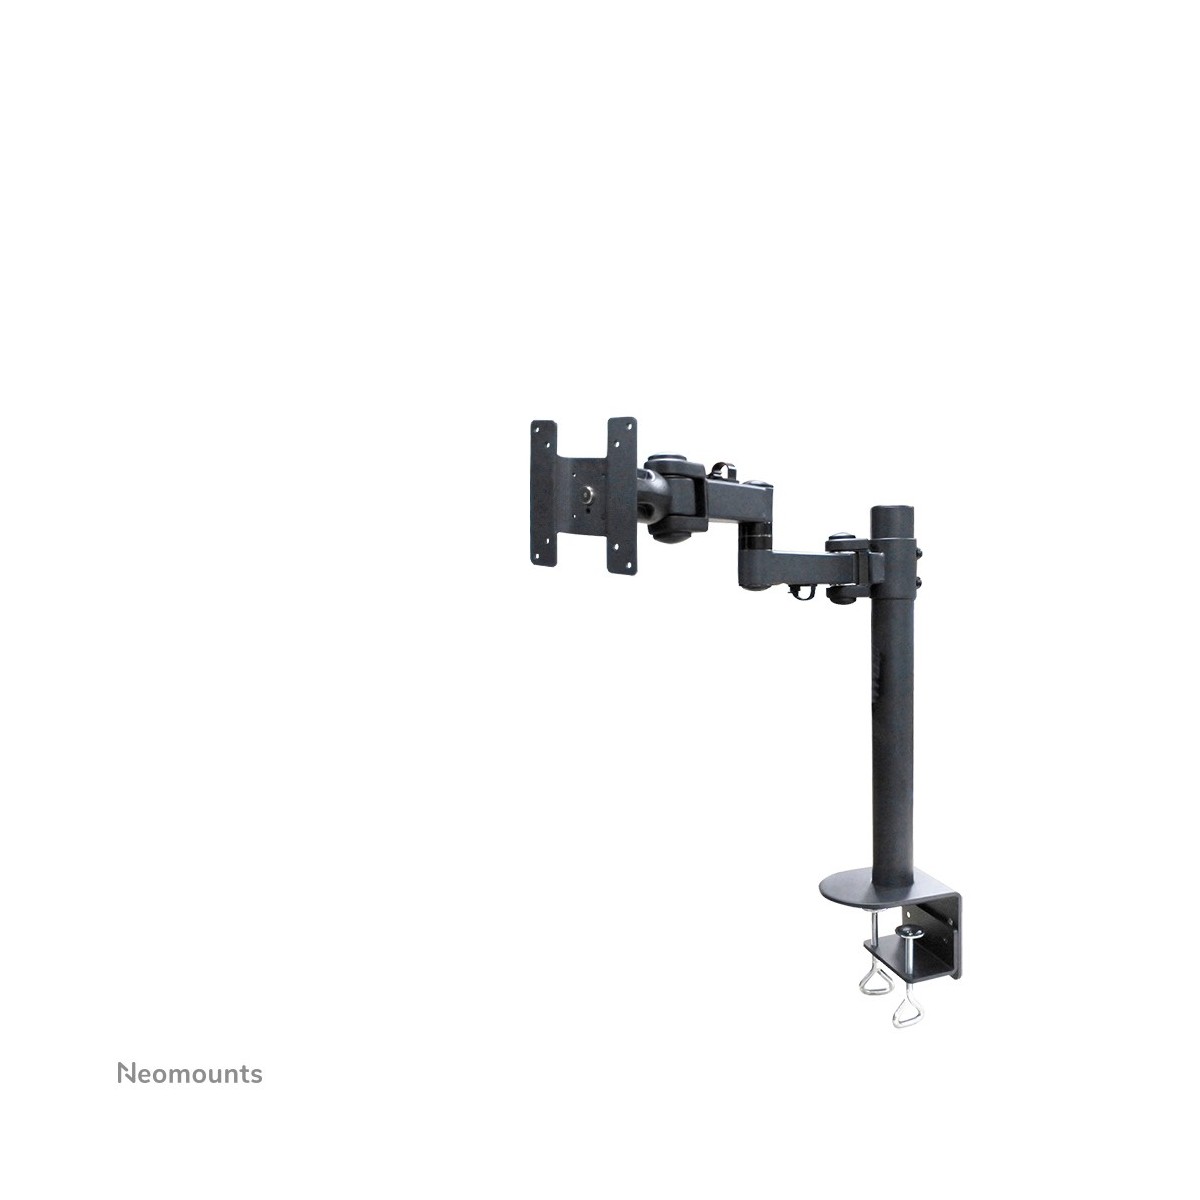 Neomounts by Newstar monitor desk mount for curved screens - Clamp - 20 kg - 25.4 cm (10) - 124.5 cm (49) - 100 x 100 mm - Black